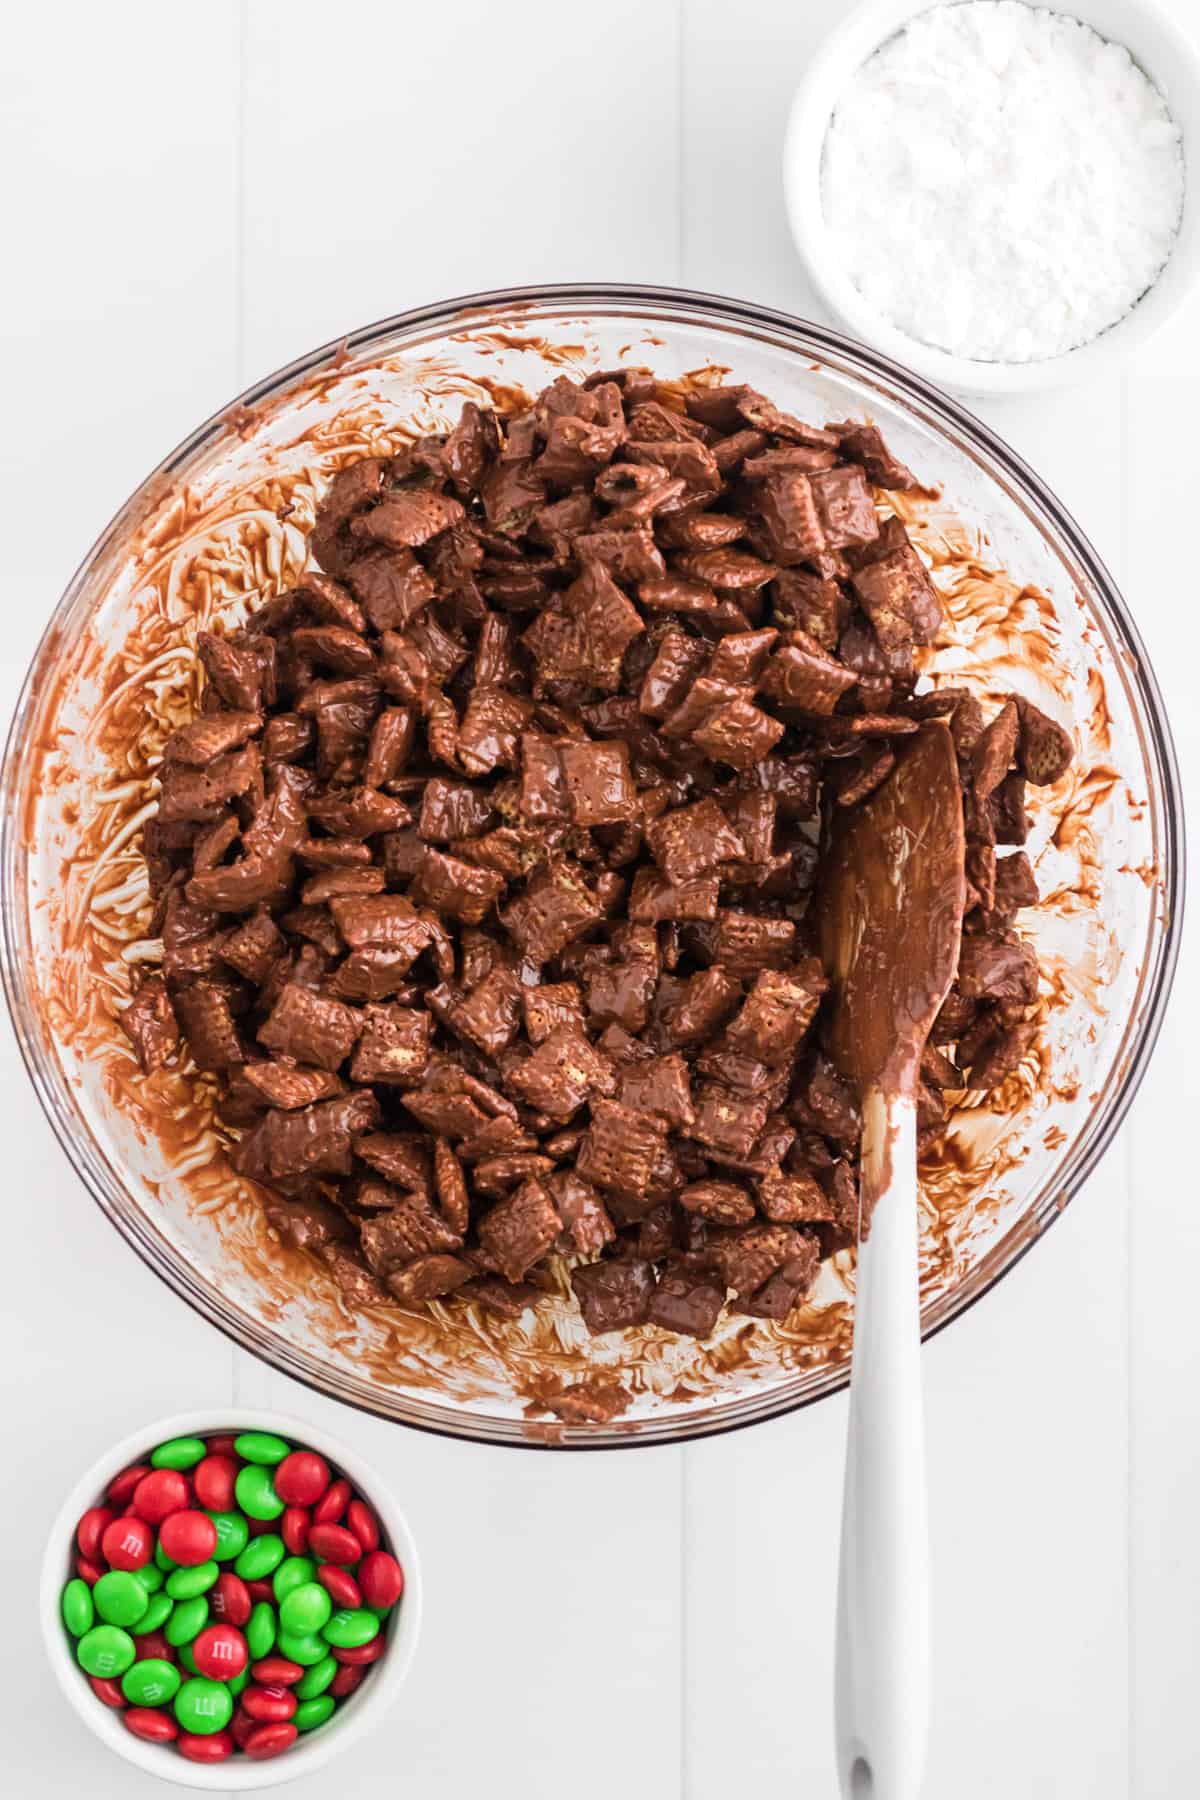 large glass bowl filled with chocolate and peanut butter coated chex cereal